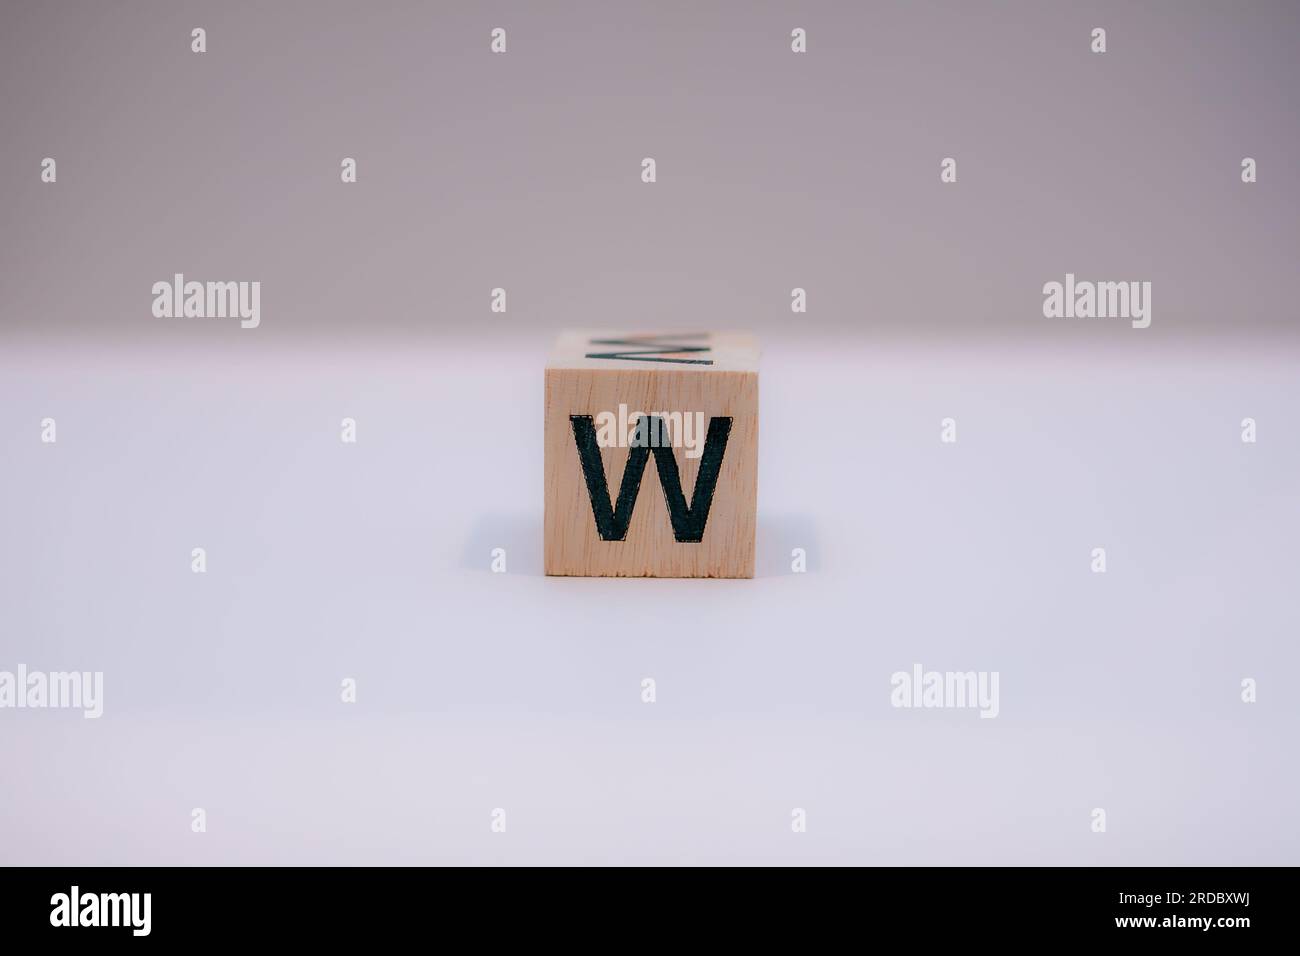 Wooden block written 'W' with a white background. Stock Photo